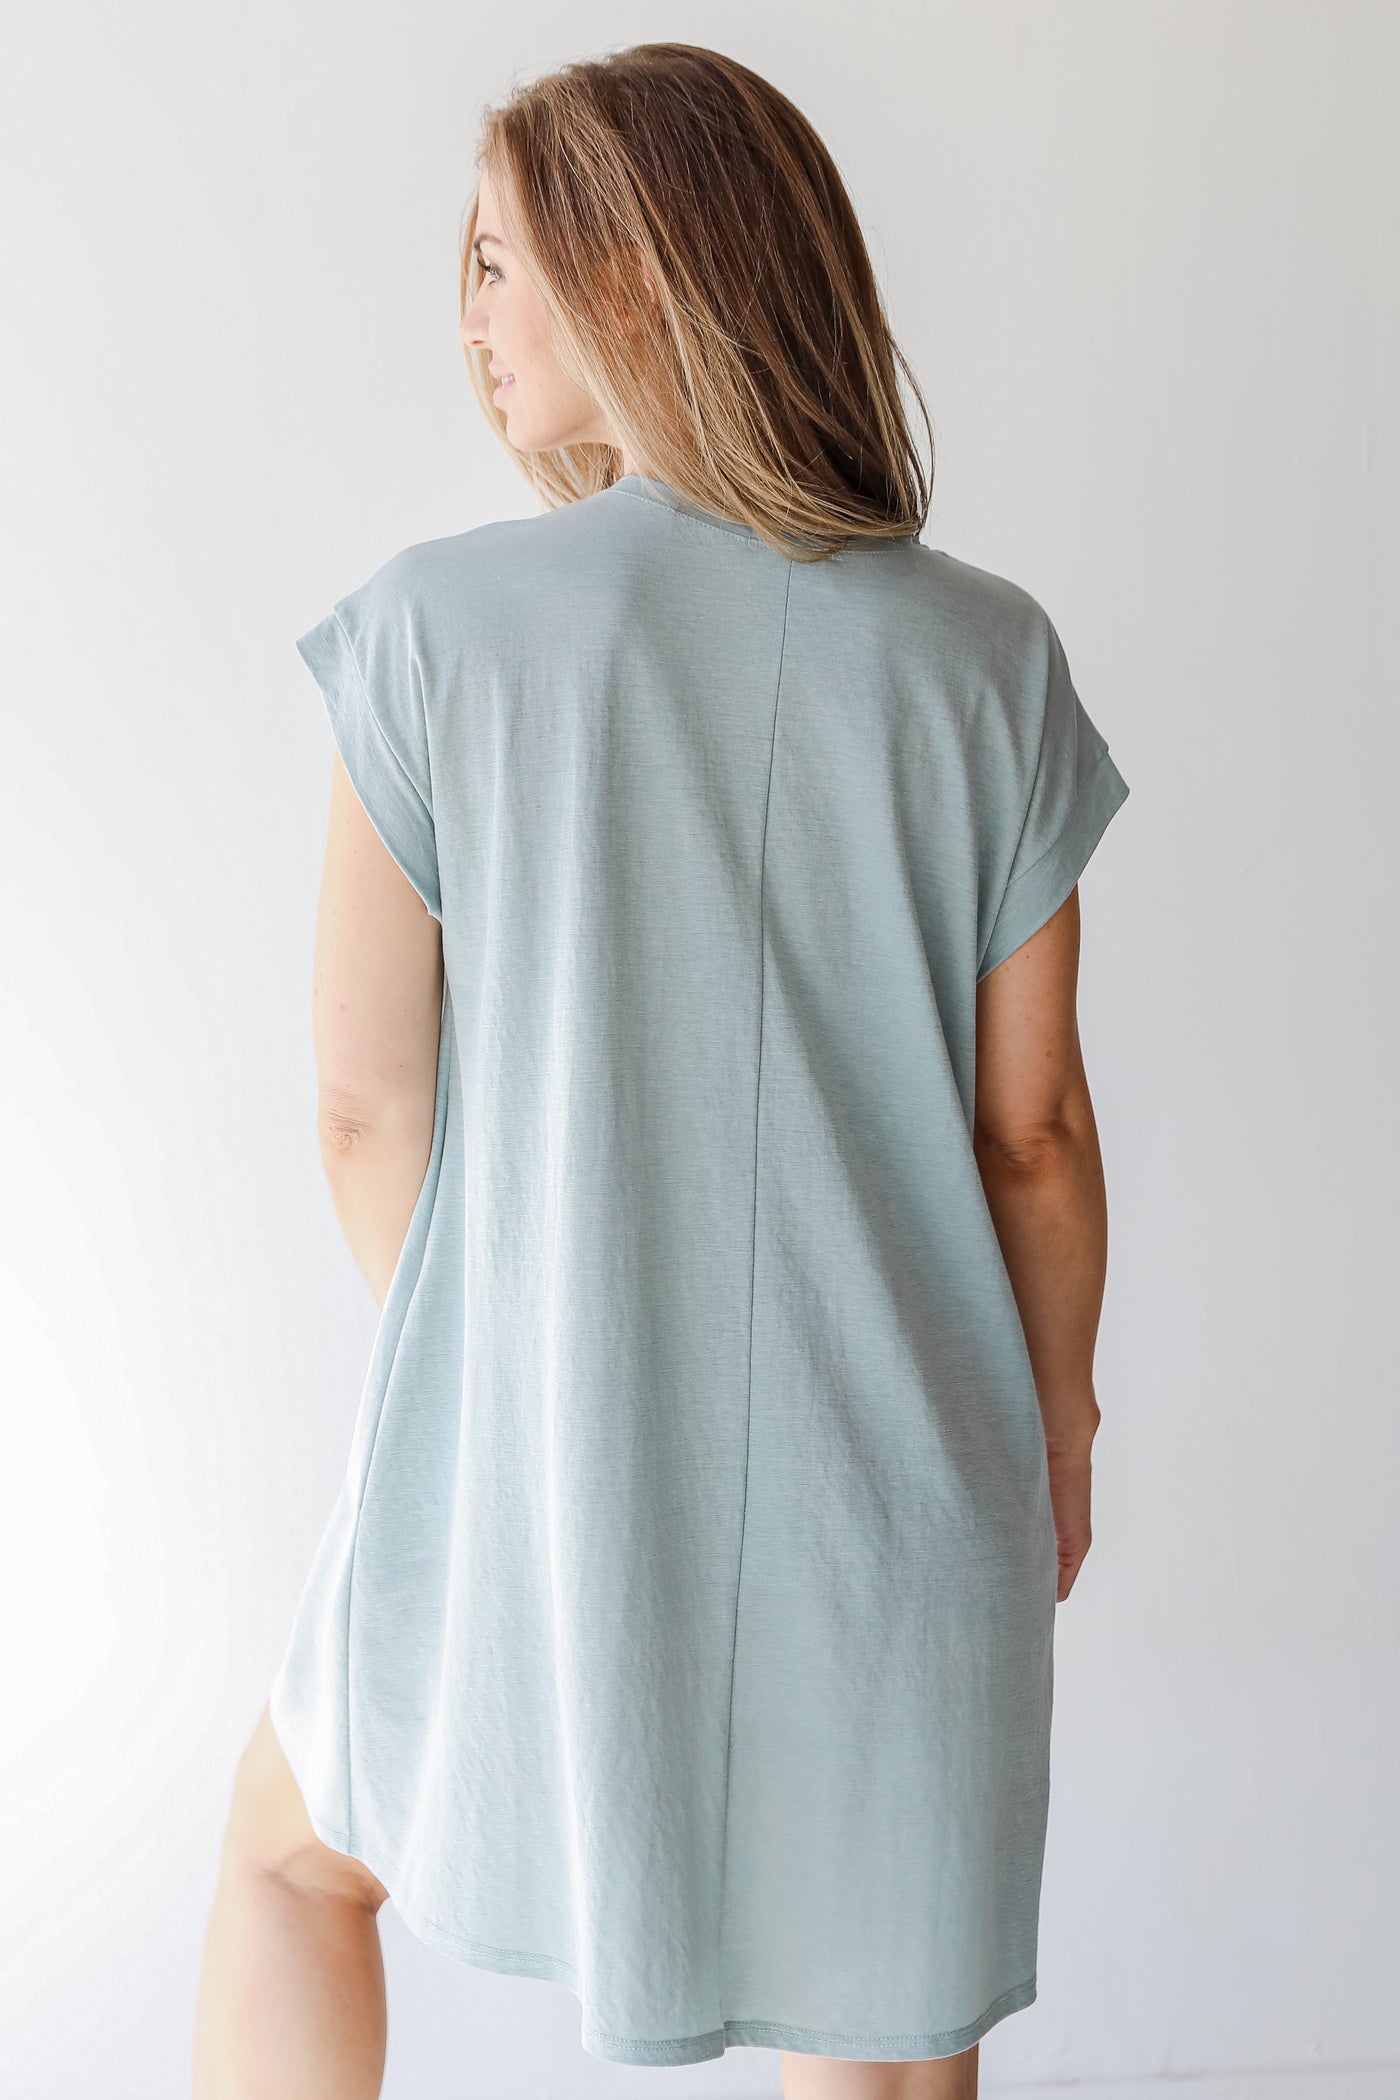 T-Shirt Dress in sage back view